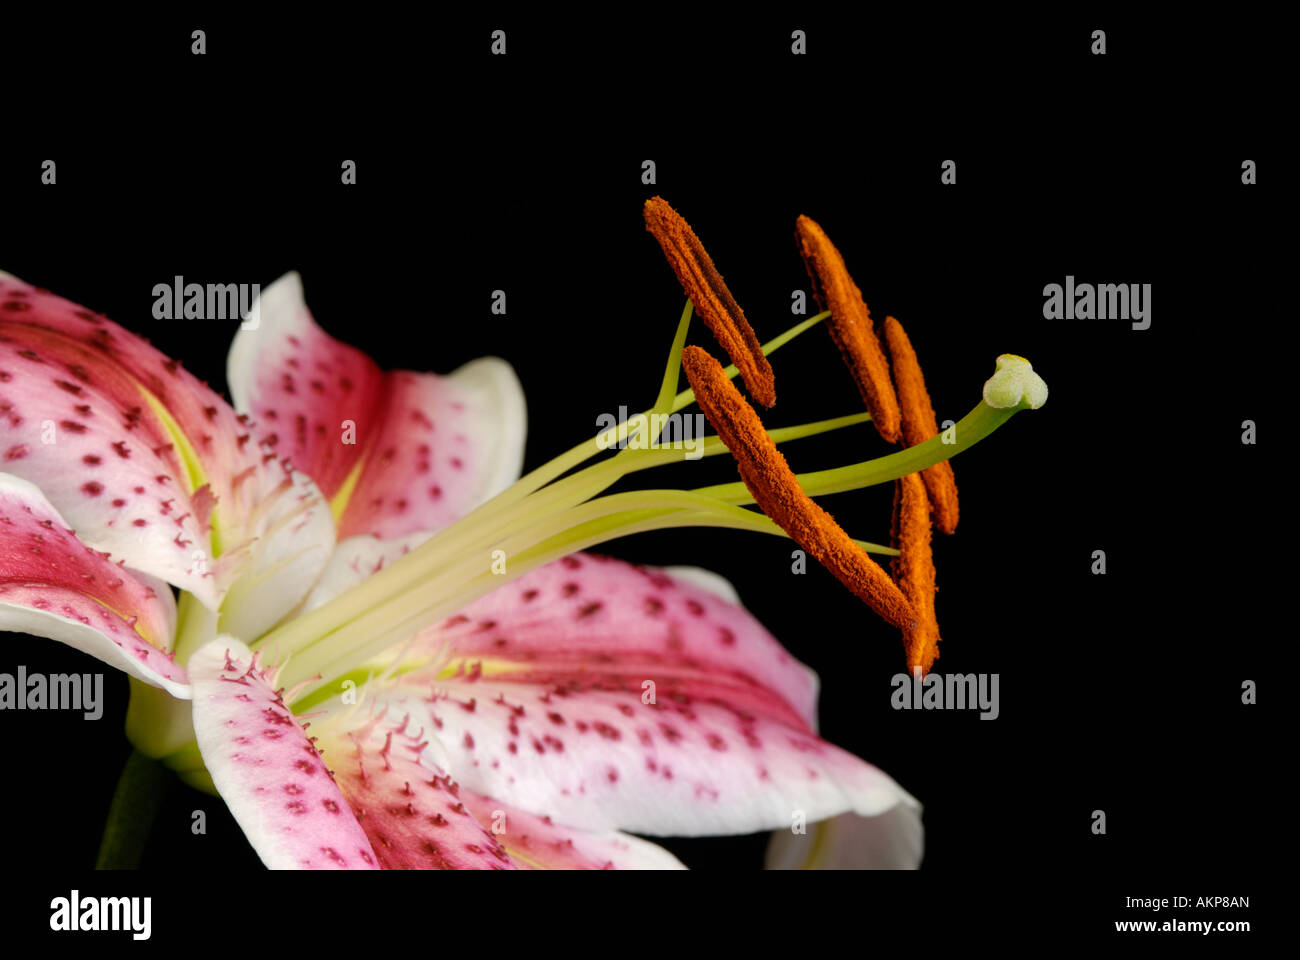 Close up of flower reproductive structures parts including stamens, anthers, pistil and stigma Stock Photo